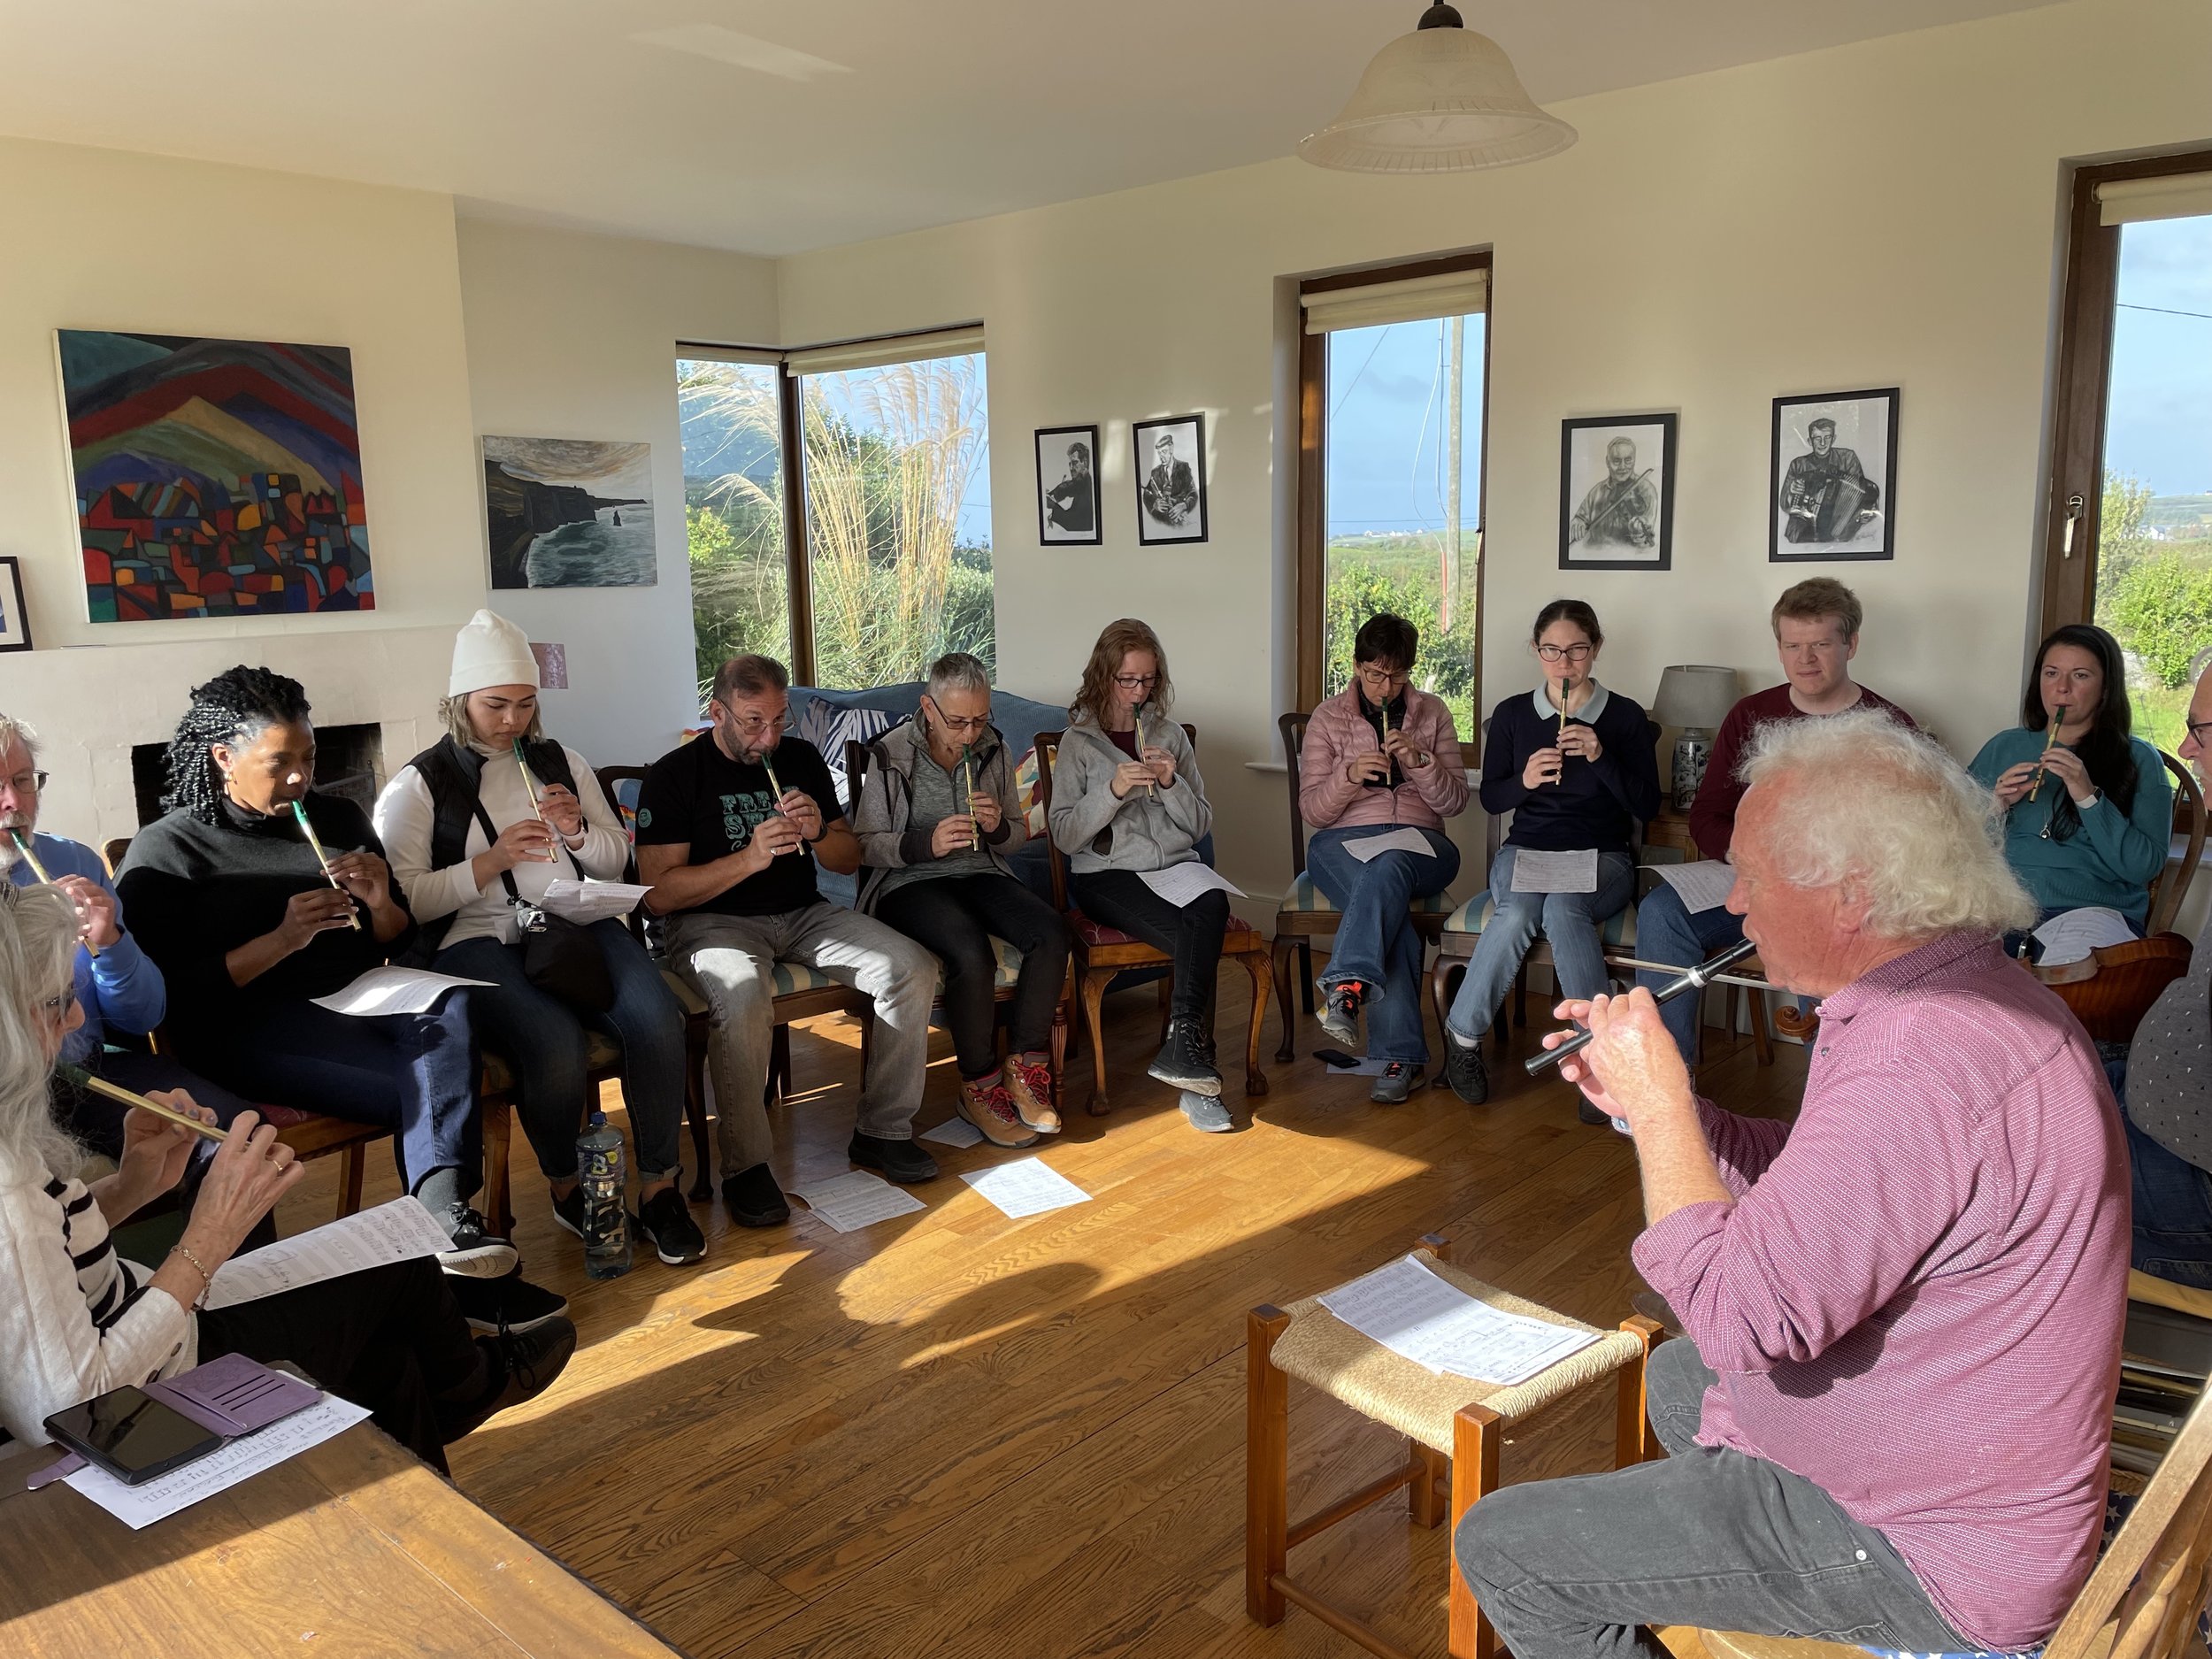 Tin Whistle lesson with Christy Barry at the Doolin Music House in Doolin County Clare 01 - photo by Mickela Mallozzi.jpg